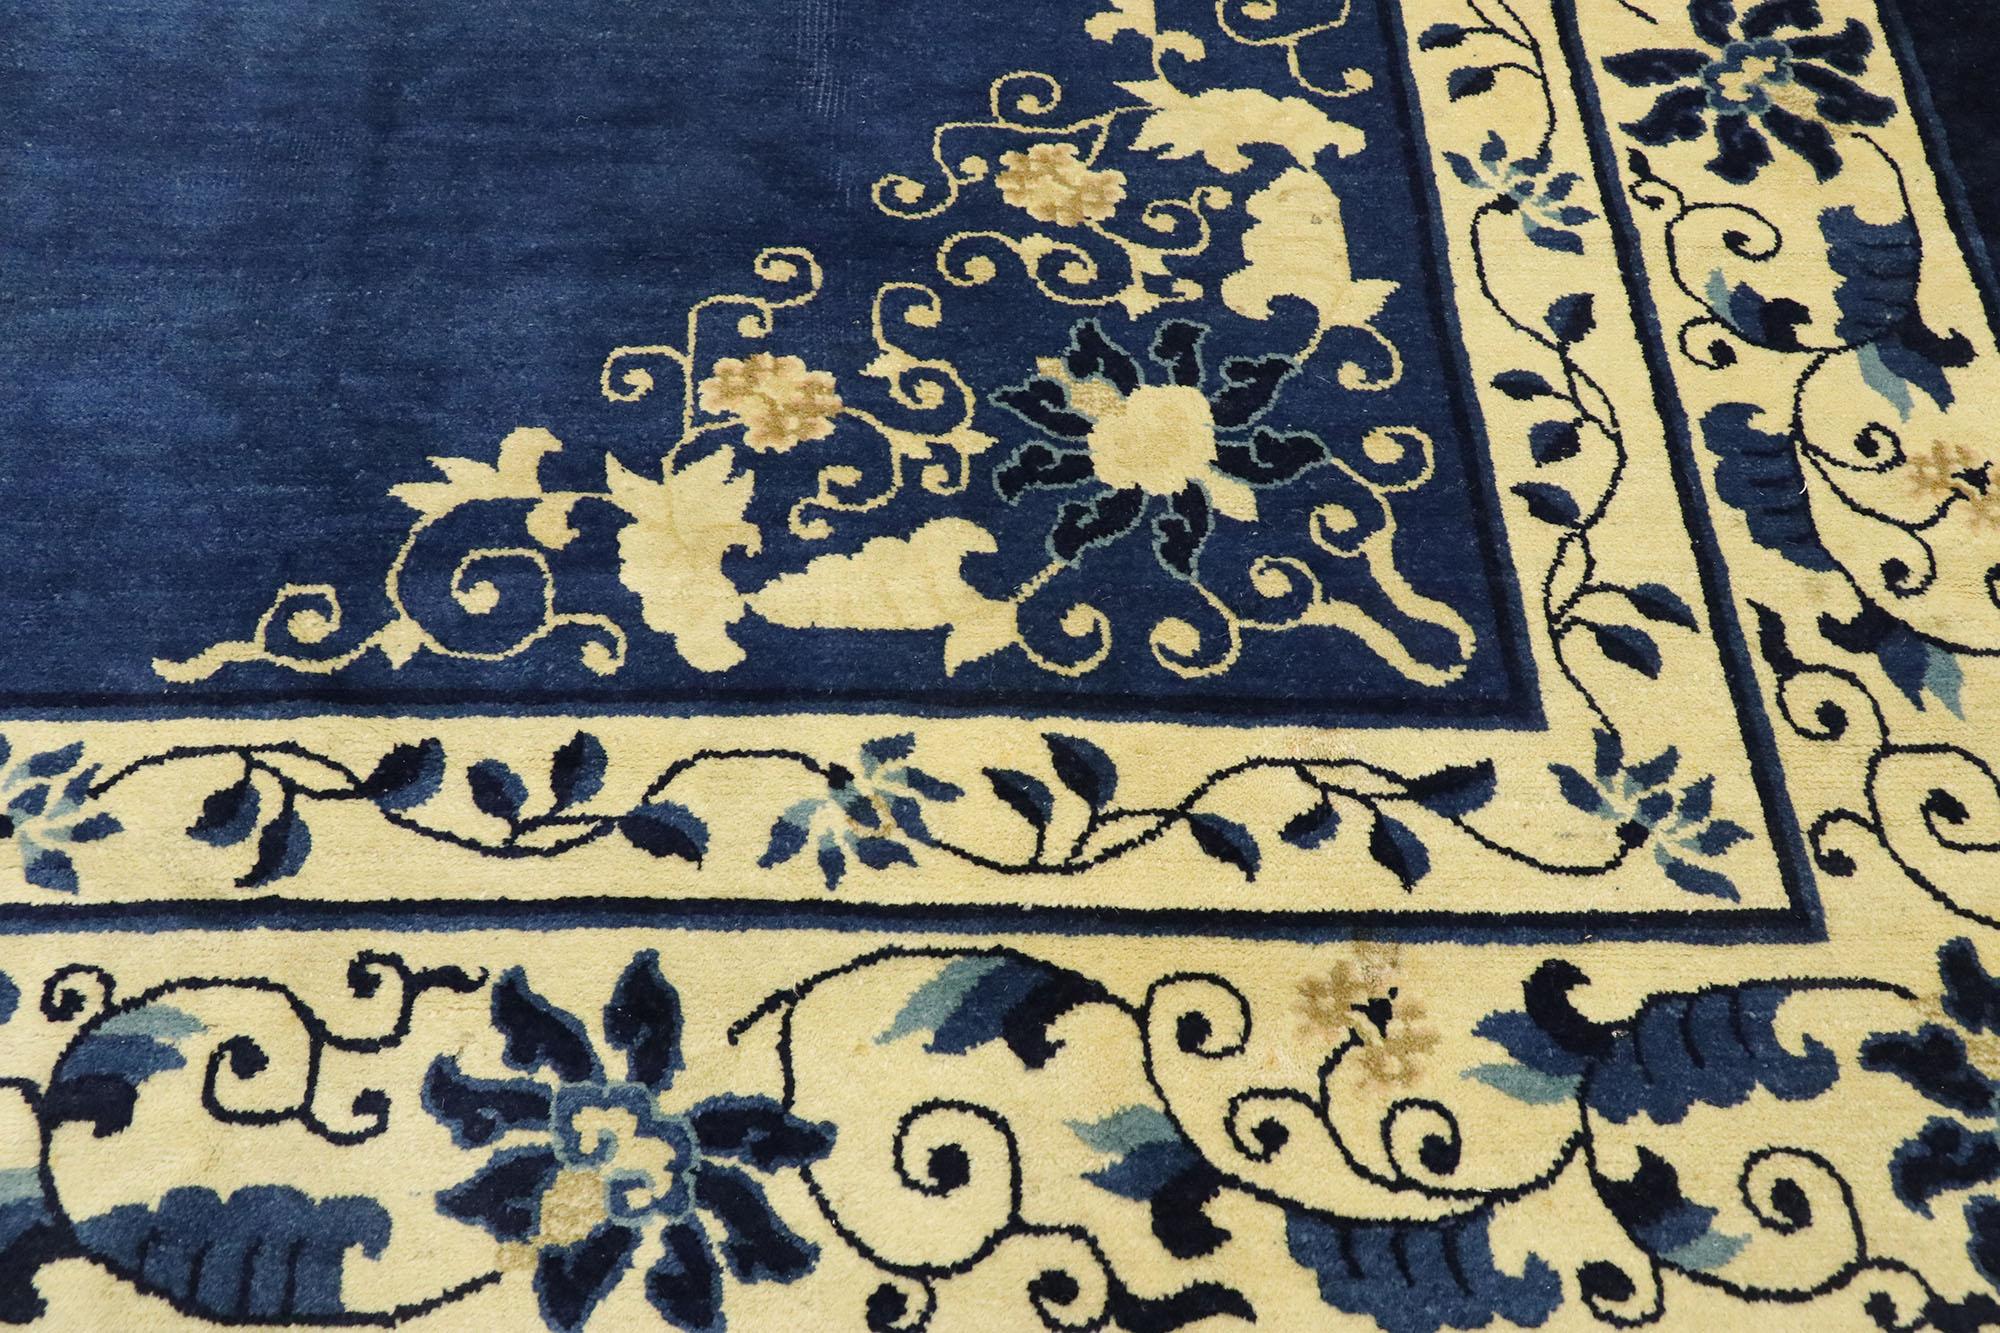 Antique Chinese Peking Rug with Romantic Chinoiserie Style In Good Condition For Sale In Dallas, TX